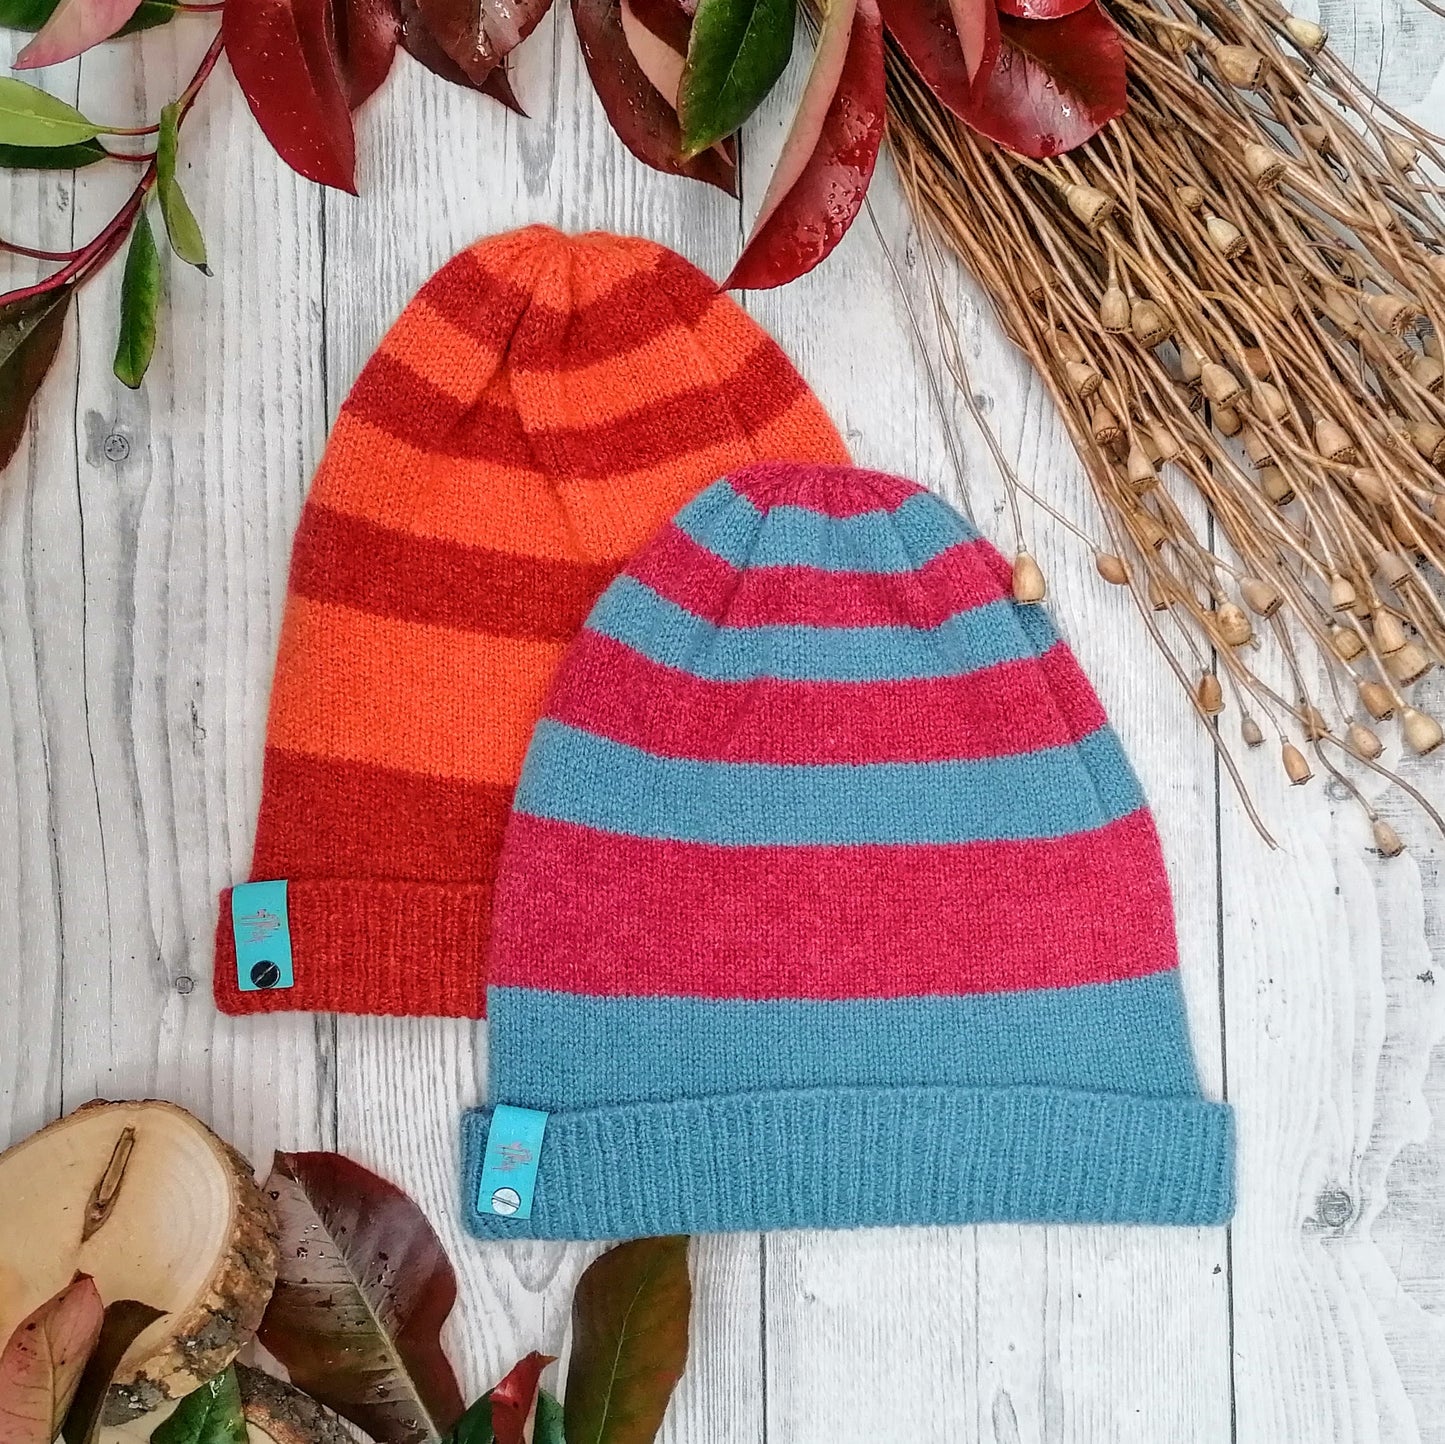 Soft Sustainable Stripy Hat - Rising Seas Turning Tides 100% lambswool made in Ireland